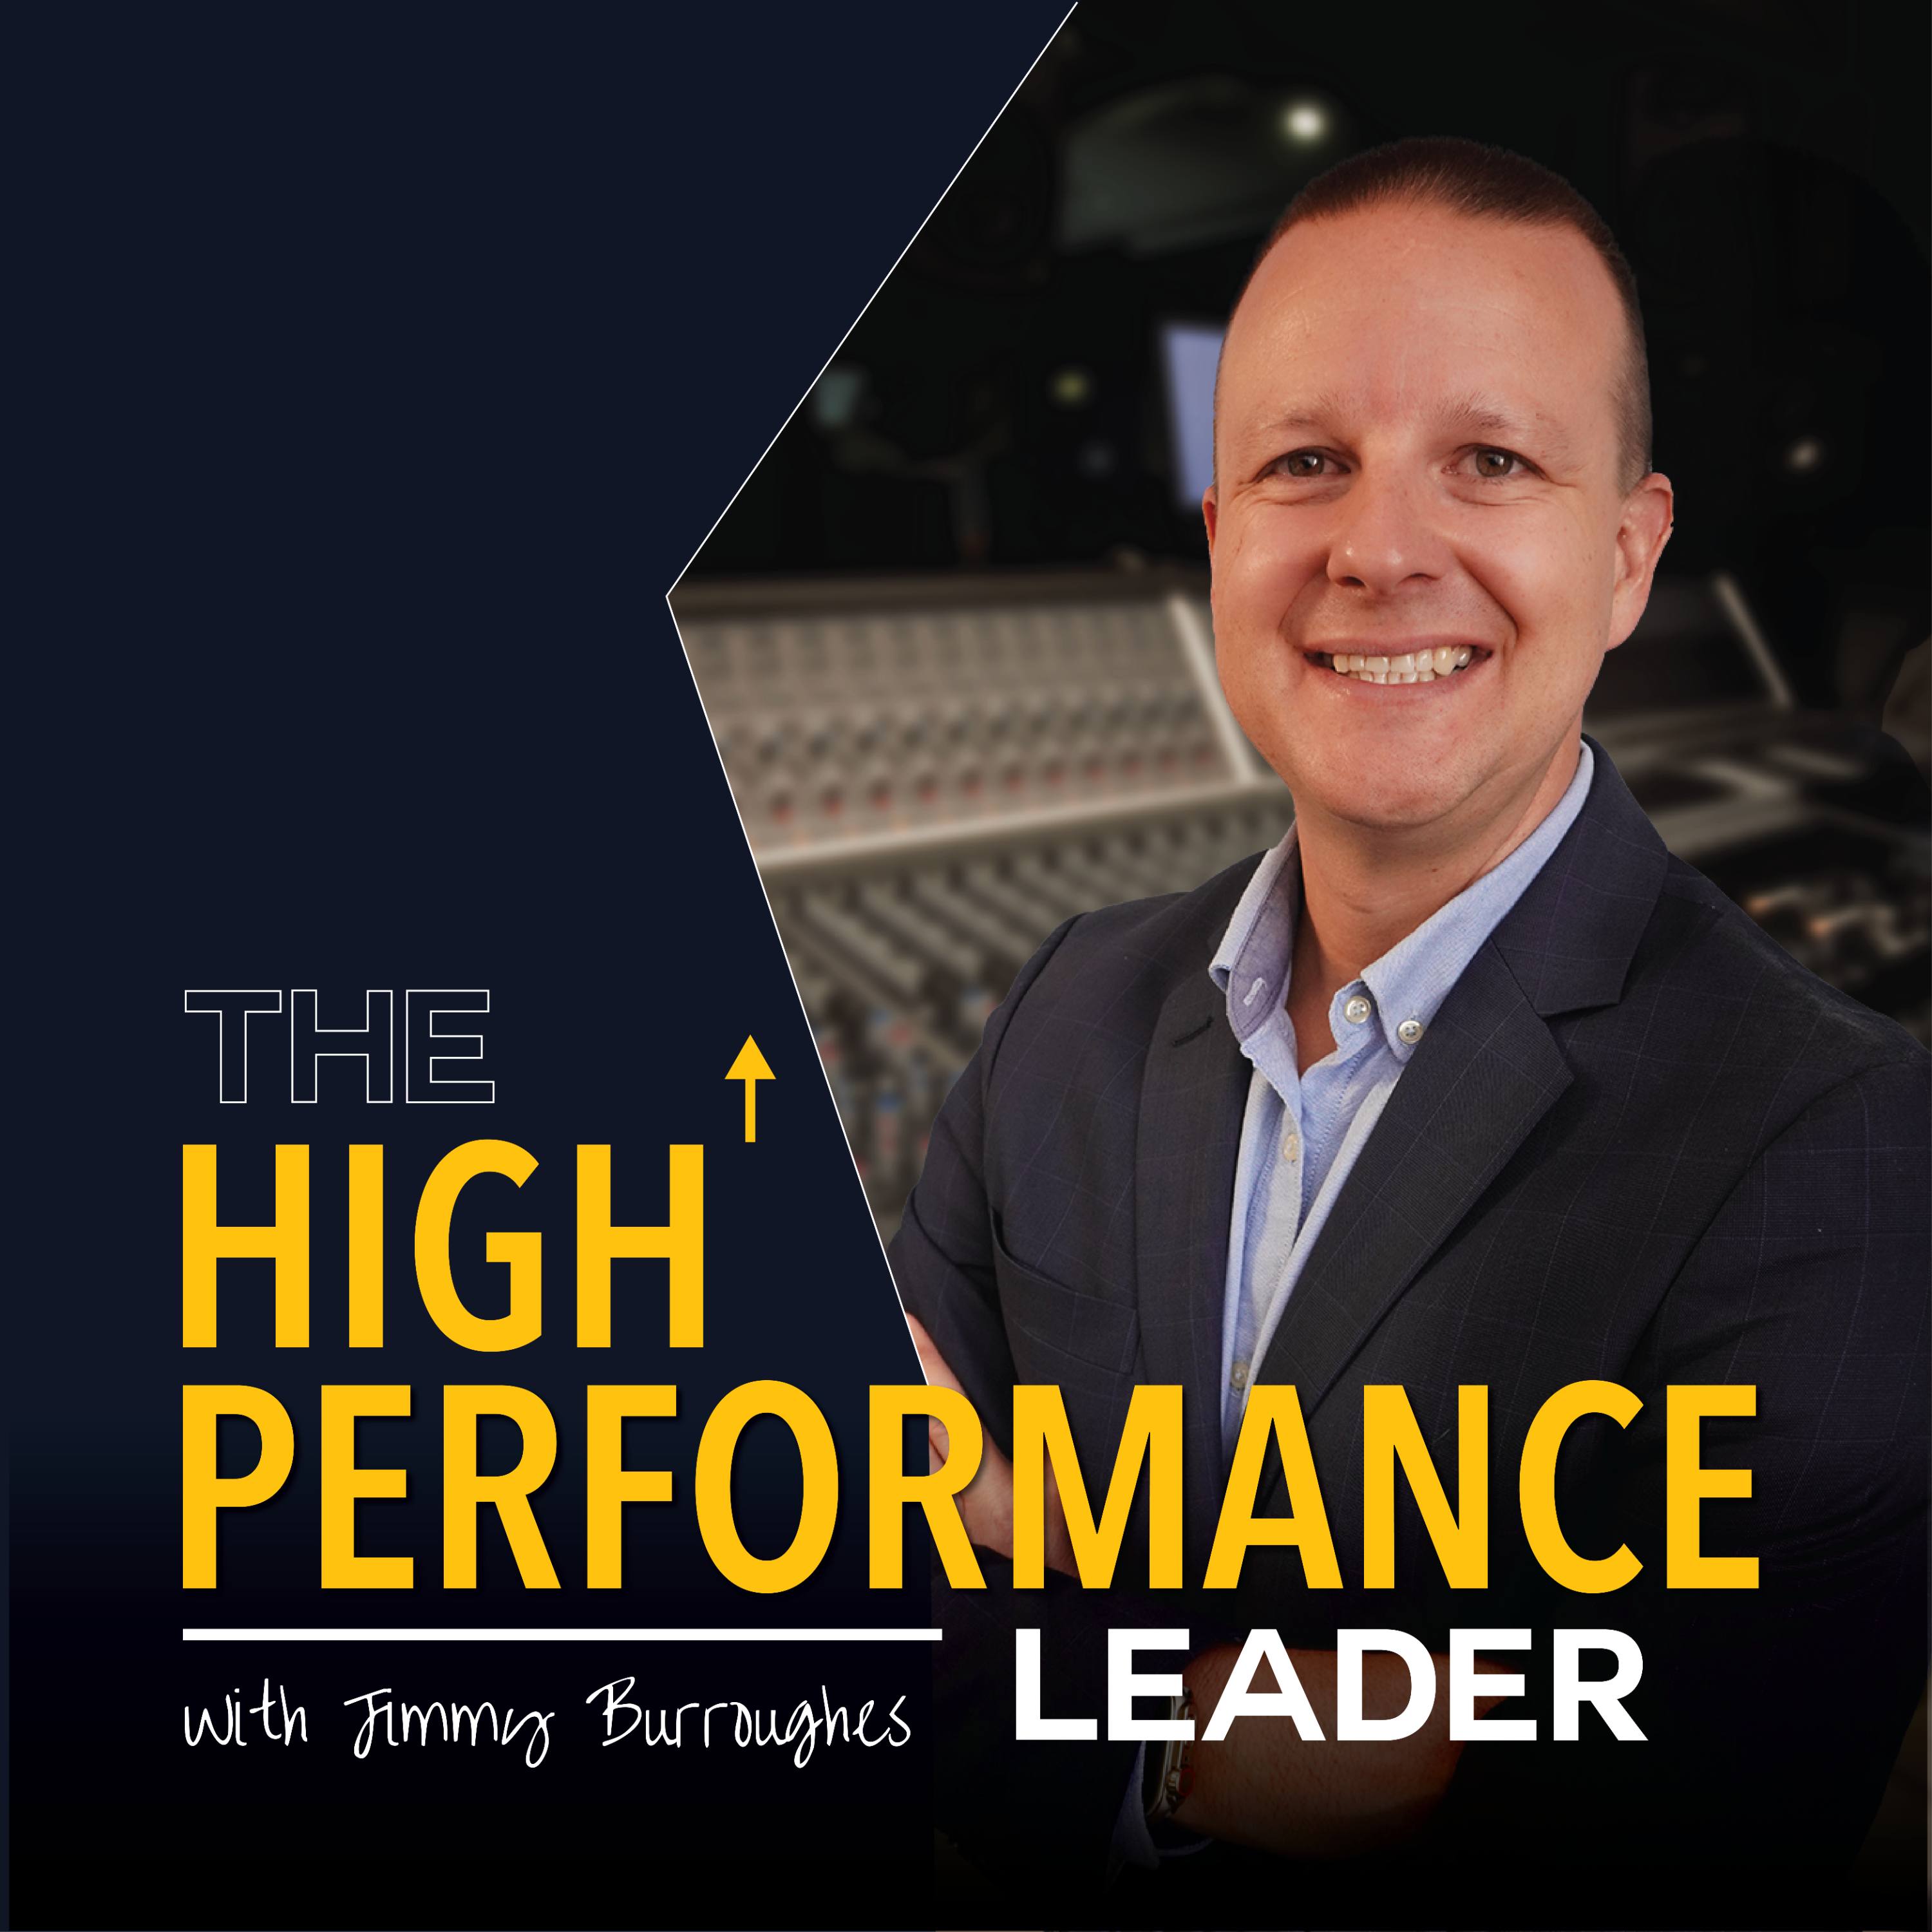 The High Performance Leader